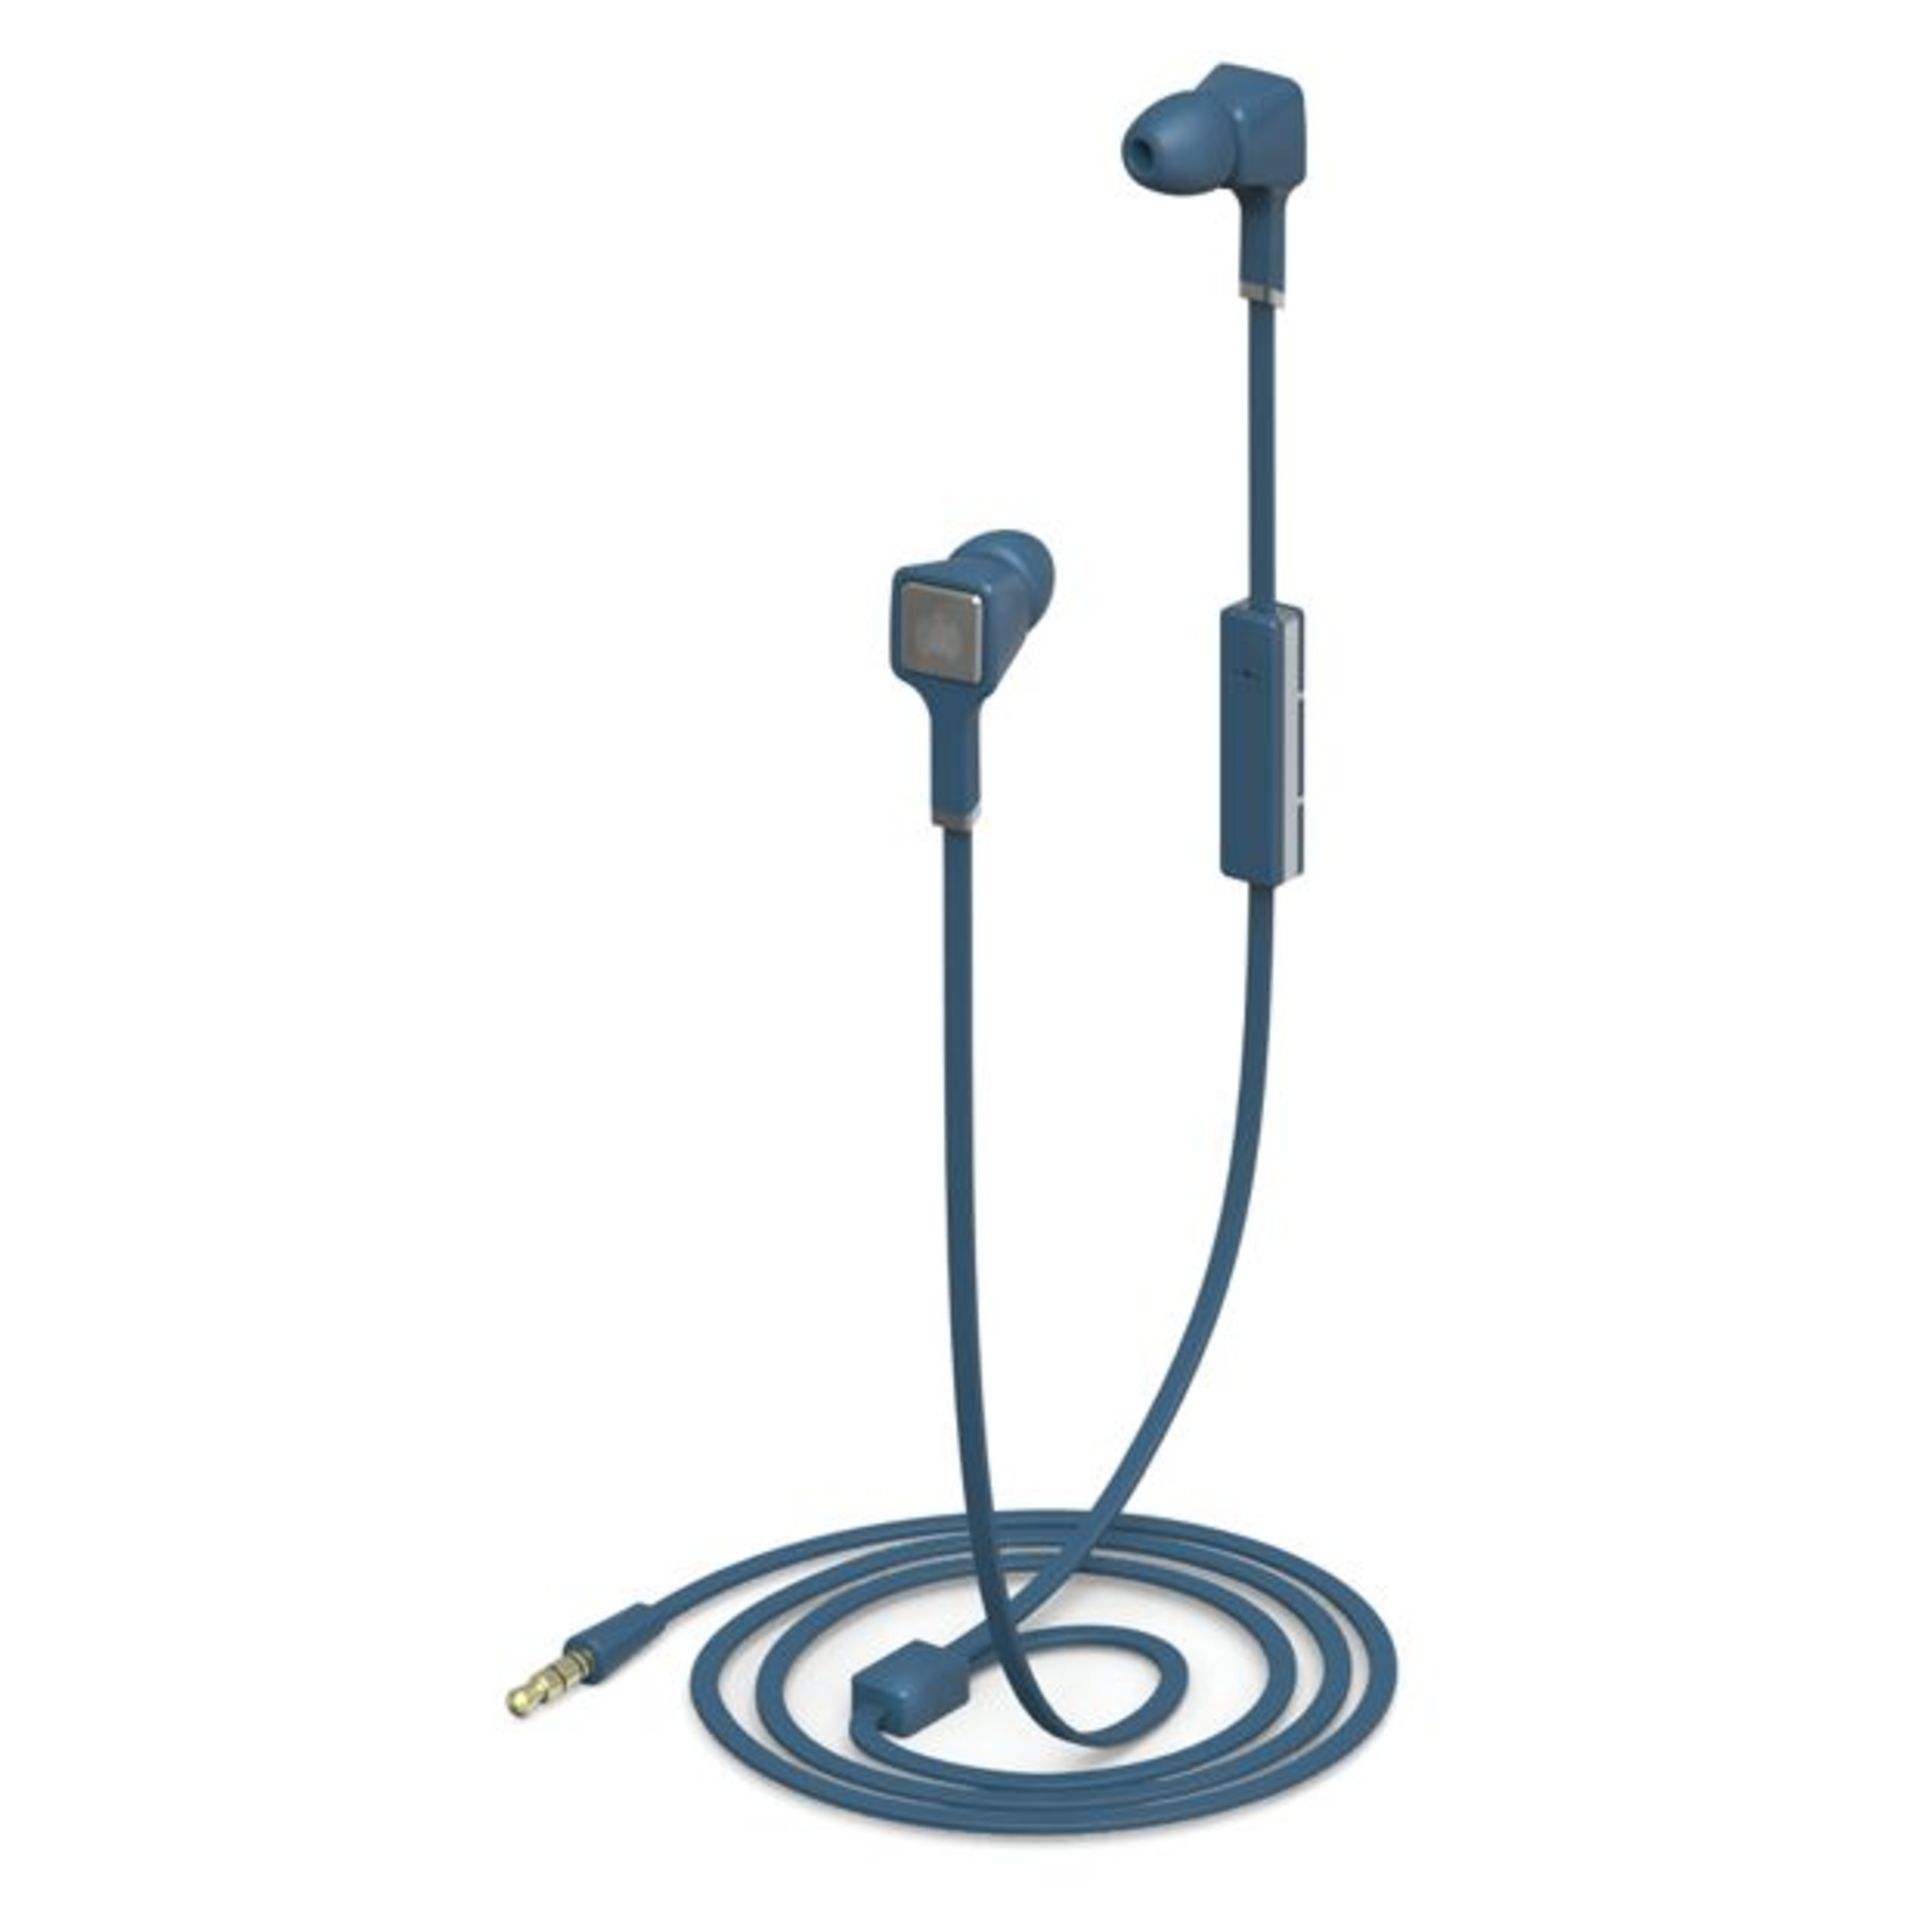 V *TRADE QTY* Brand New Ministry Of Sound Audio In - In Ear Headphones - Blue/Grey - RRP£39.99 X 3 - Image 2 of 3